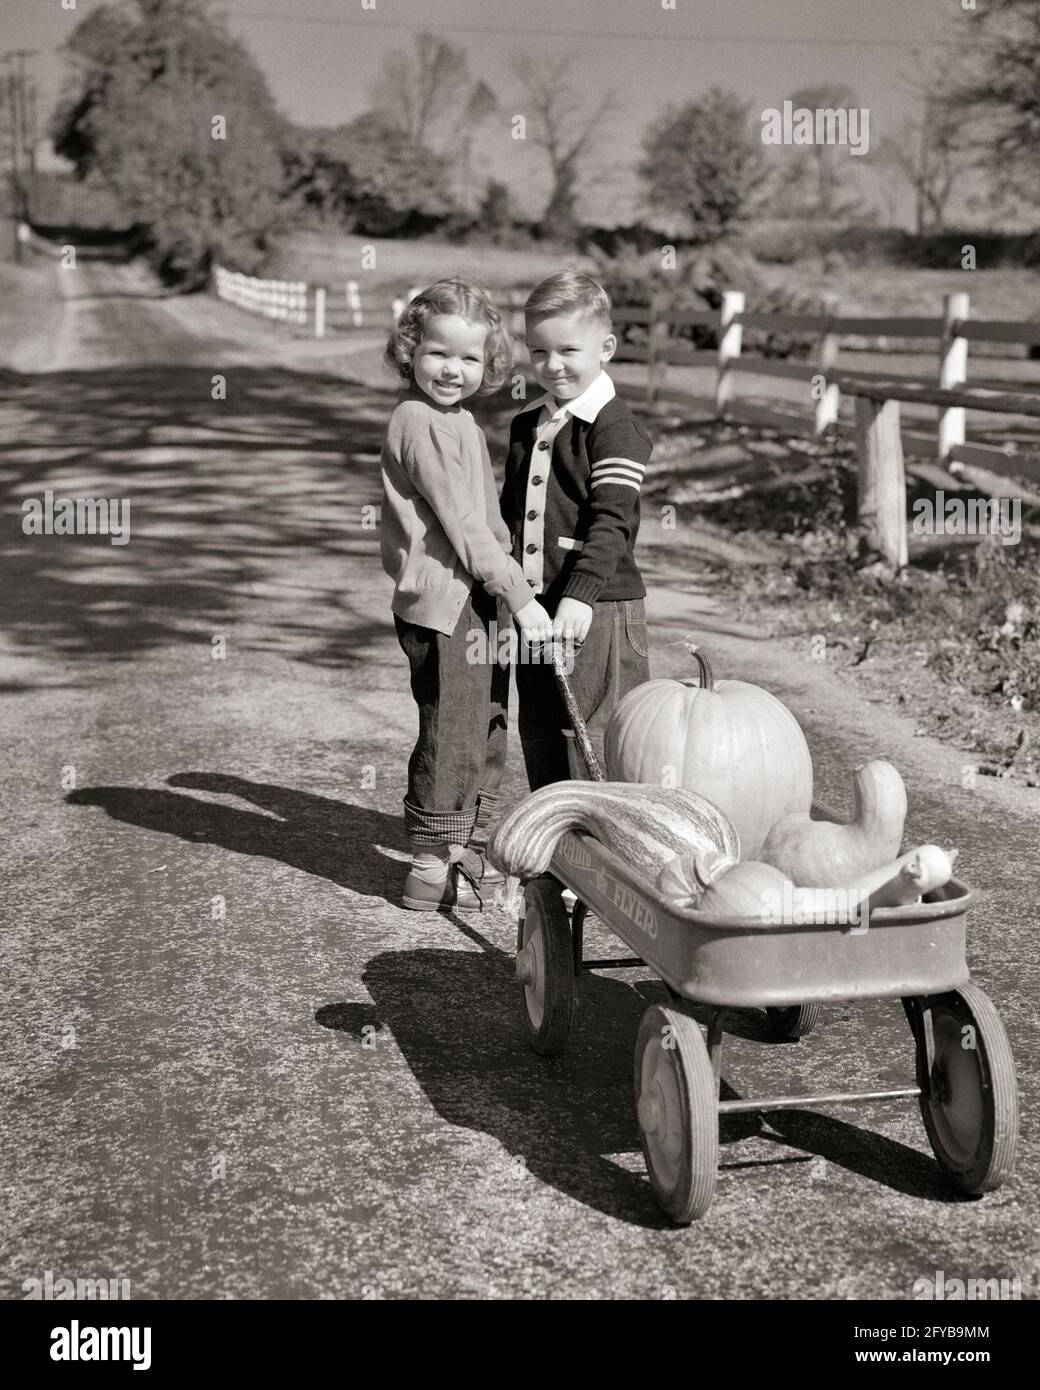 1950s TWO SMILING YOUNG KIDS BOY GIRL BROTHER SISTER IN BLUE JEANS LOOKING AT CAMERA PULLING WAGON FULL OF PUMPKINS AND GOURDS - c4928 HAR001 HARS SISTER 1 WAGON JUVENILE CUTE STYLE FRIEND TEAMWORK JOY LIFESTYLE FEMALES BROTHERS YOUTHS RURAL HEALTHINESS HOME LIFE NATURE TRANSPORT FRIENDSHIP FULL-LENGTH HALF-LENGTH PERSONS MALES SIBLINGS SISTERS TRANSPORTATION AGRICULTURE B&W EYE CONTACT HARVESTING HAPPINESS PUMPKINS AND FALL SEASON SIBLING GOURD FRIENDLY YOUNGSTERS VARSITY SWEATER OCTOBER CHARMING COOPERATION GOURDS GROWTH JUVENILES SEASON TOGETHERNESS YOUNGSTER AUTUMNAL BLACK AND WHITE Stock Photo